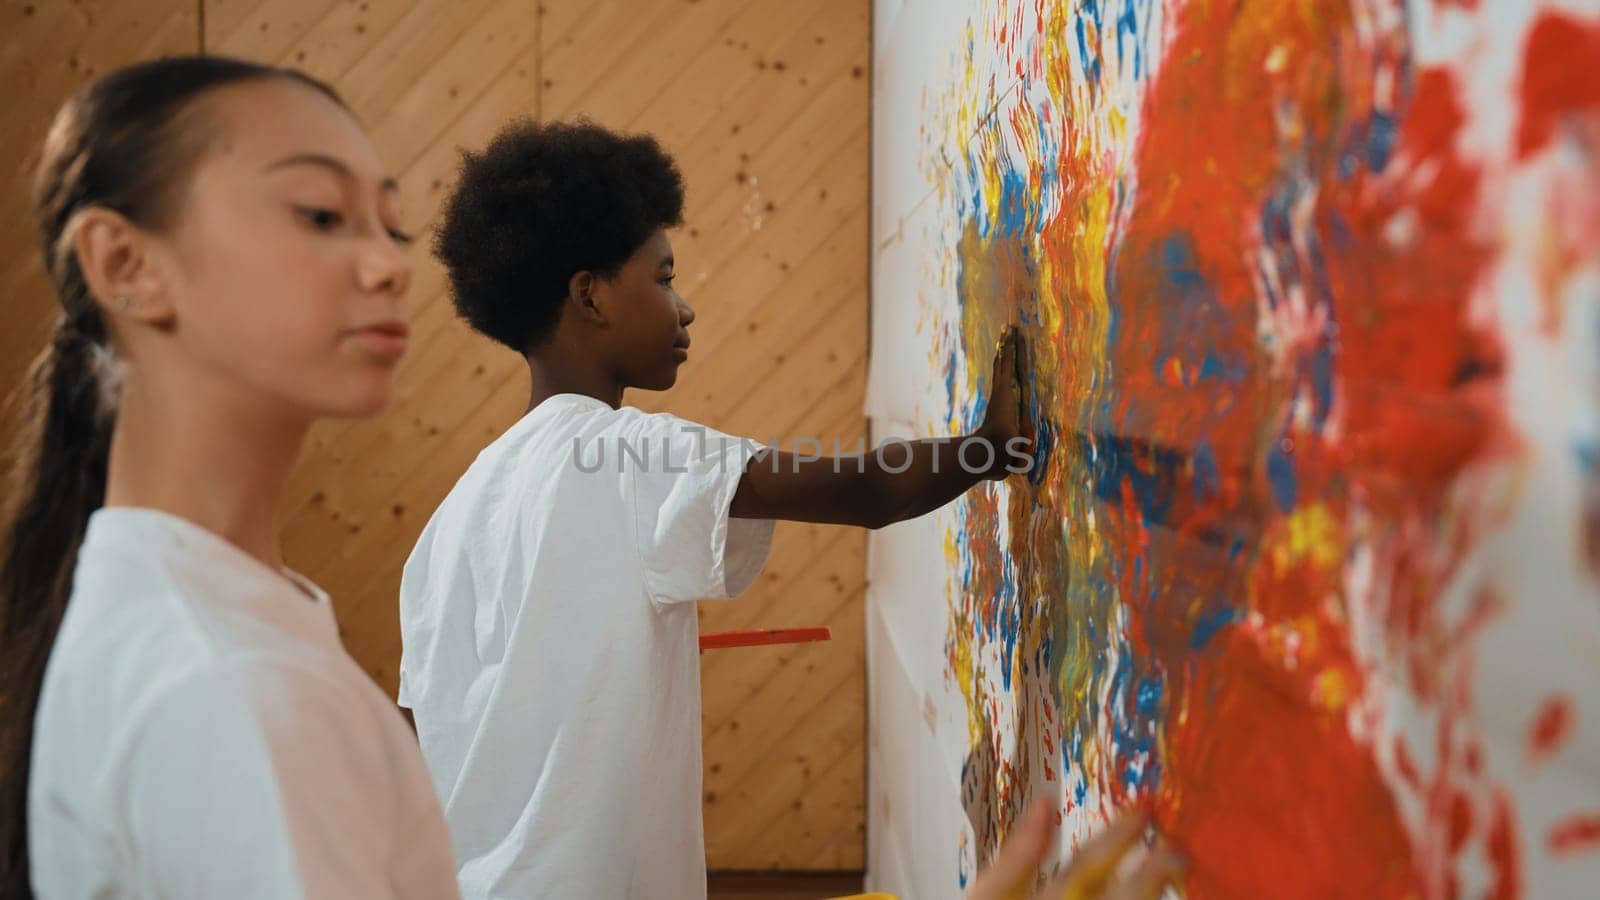 Diverse happy highschool girl and african boy paint the wall with water color in red and blue or contrast color by using their hands in art lesson. Side view. Creative activity concept. Edification.